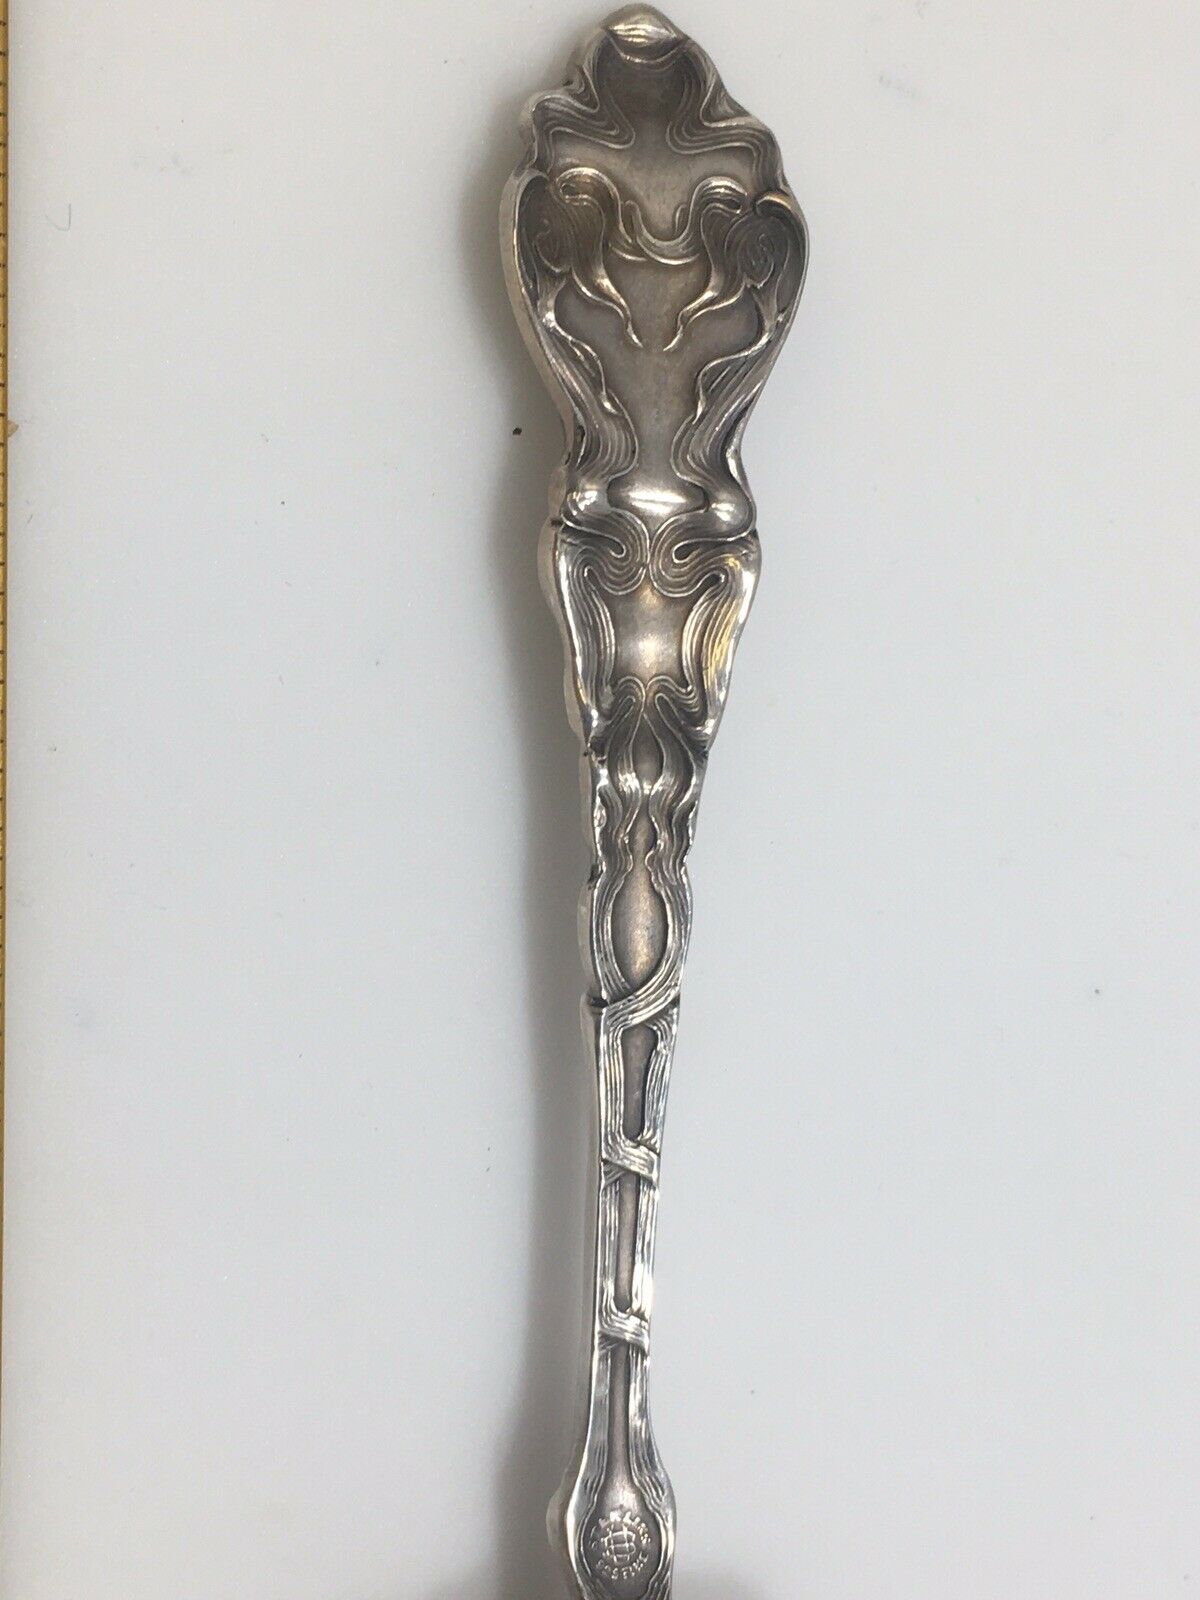 Unger Brothers Douvaine Pattern Pierced Tomato Server. RARE